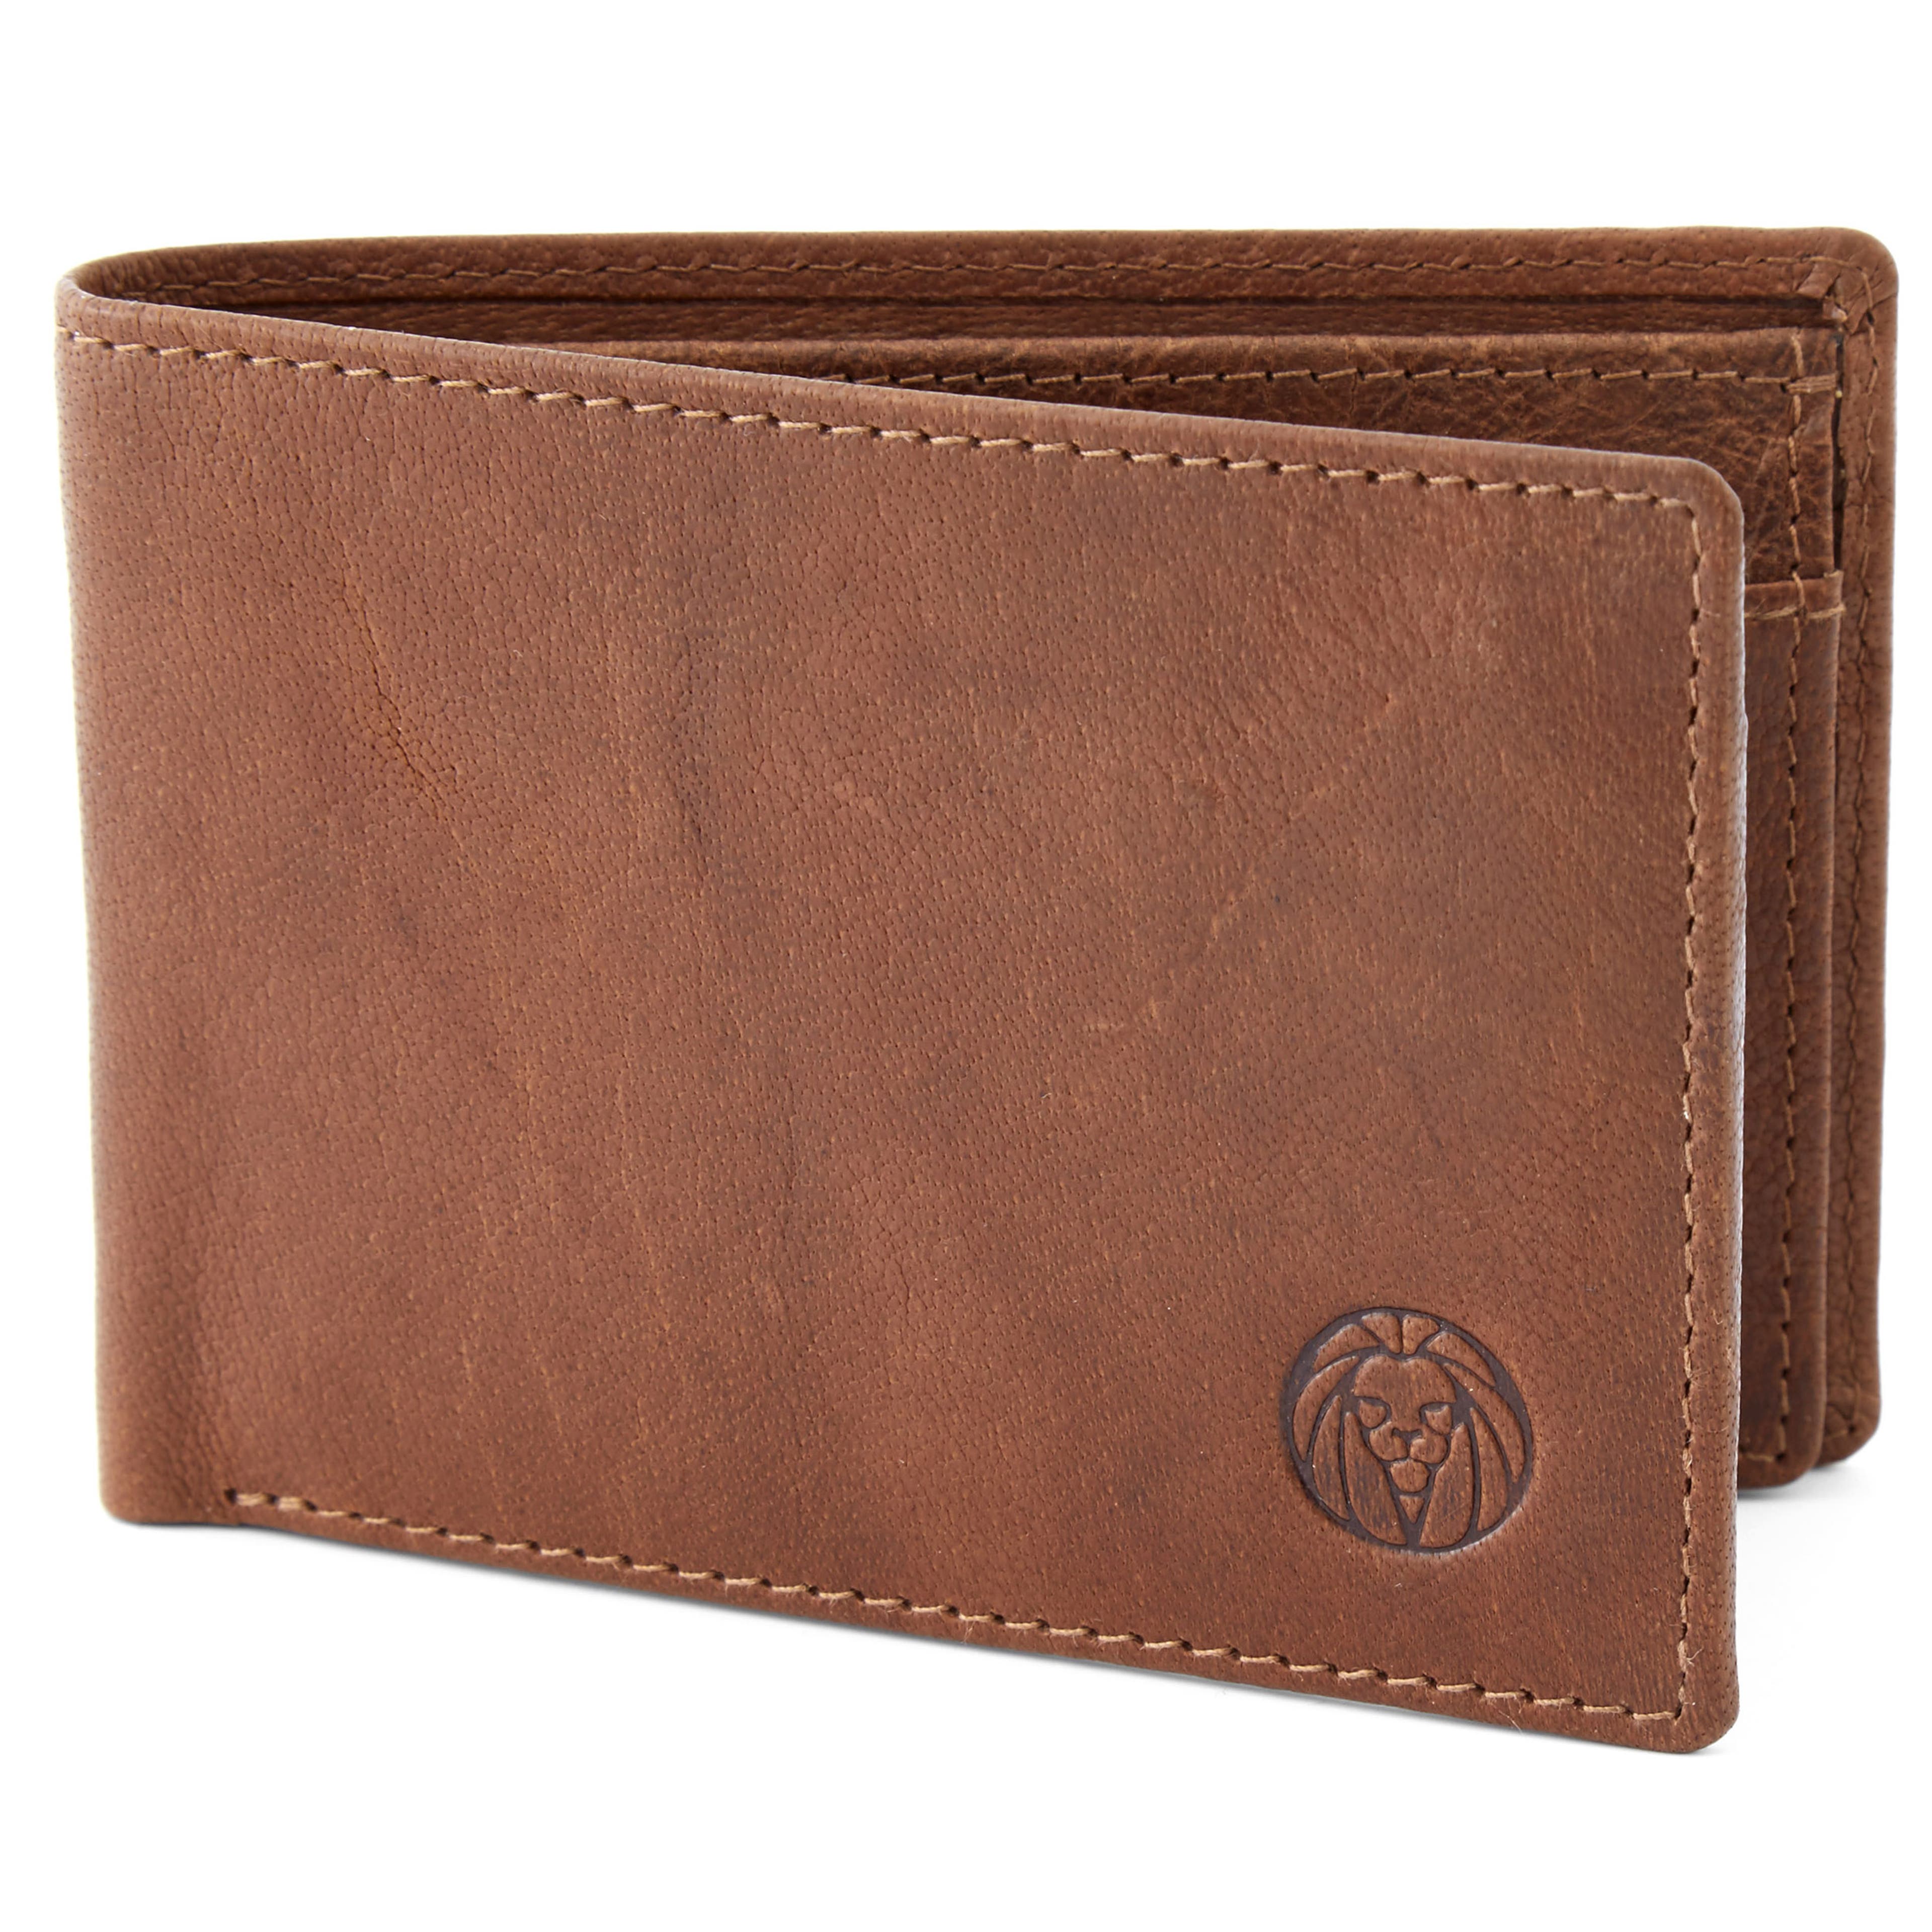 California | Small Tan Leather Wallet